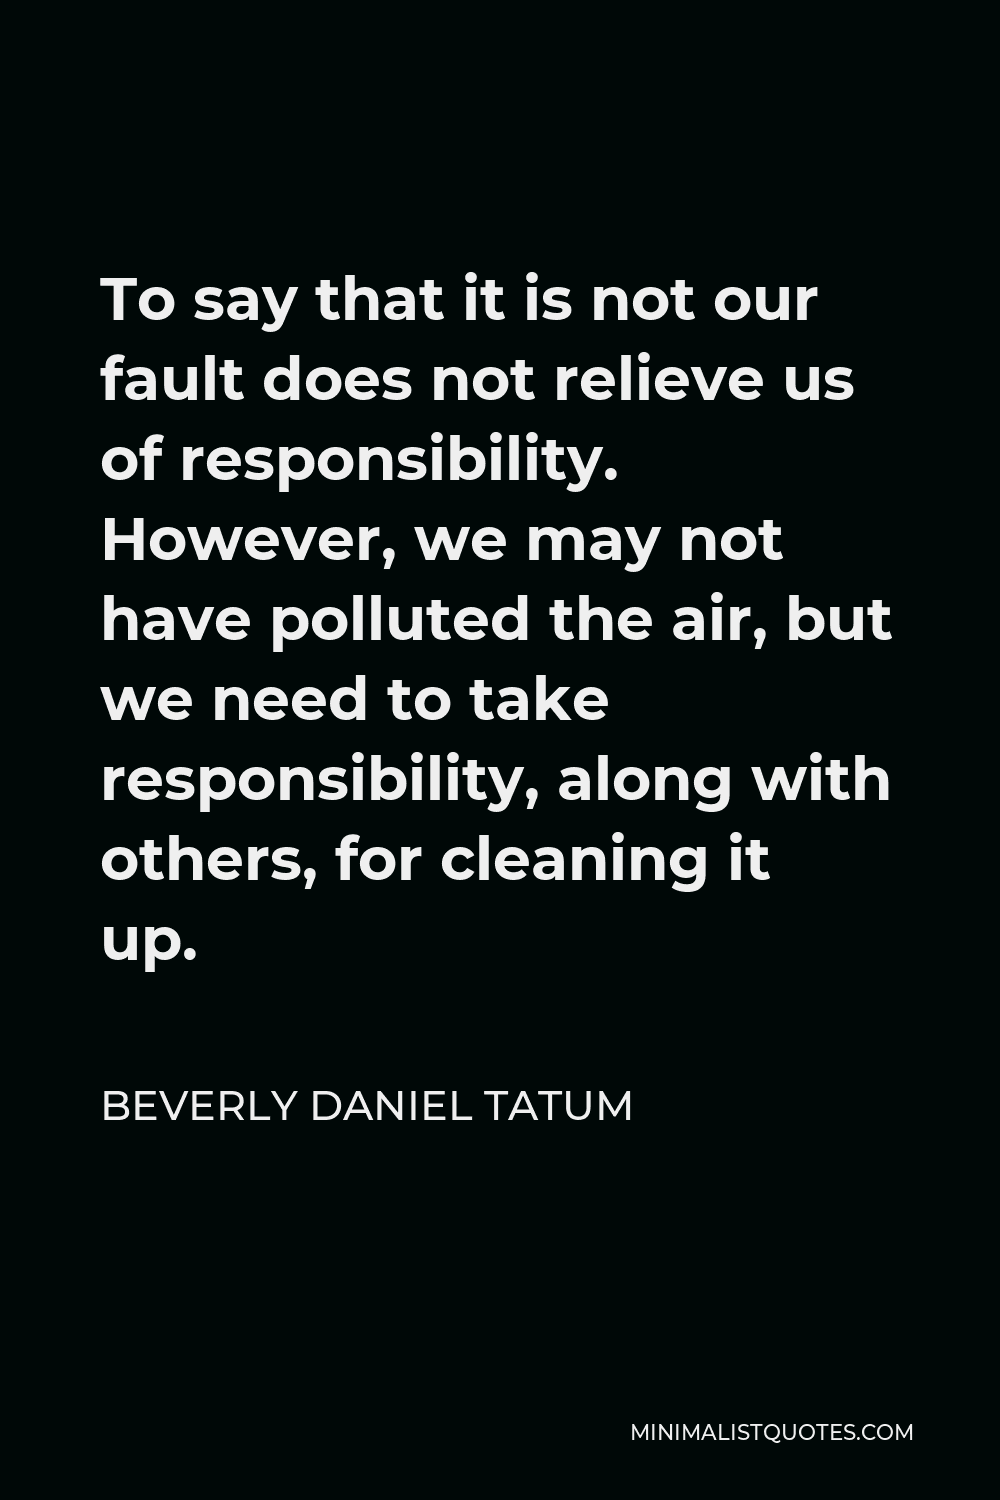 Beverly Daniel Tatum Quote - To say that it is not our fault does not relieve us of responsibility. However, we may not have polluted the air, but we need to take responsibility, along with others, for cleaning it up.